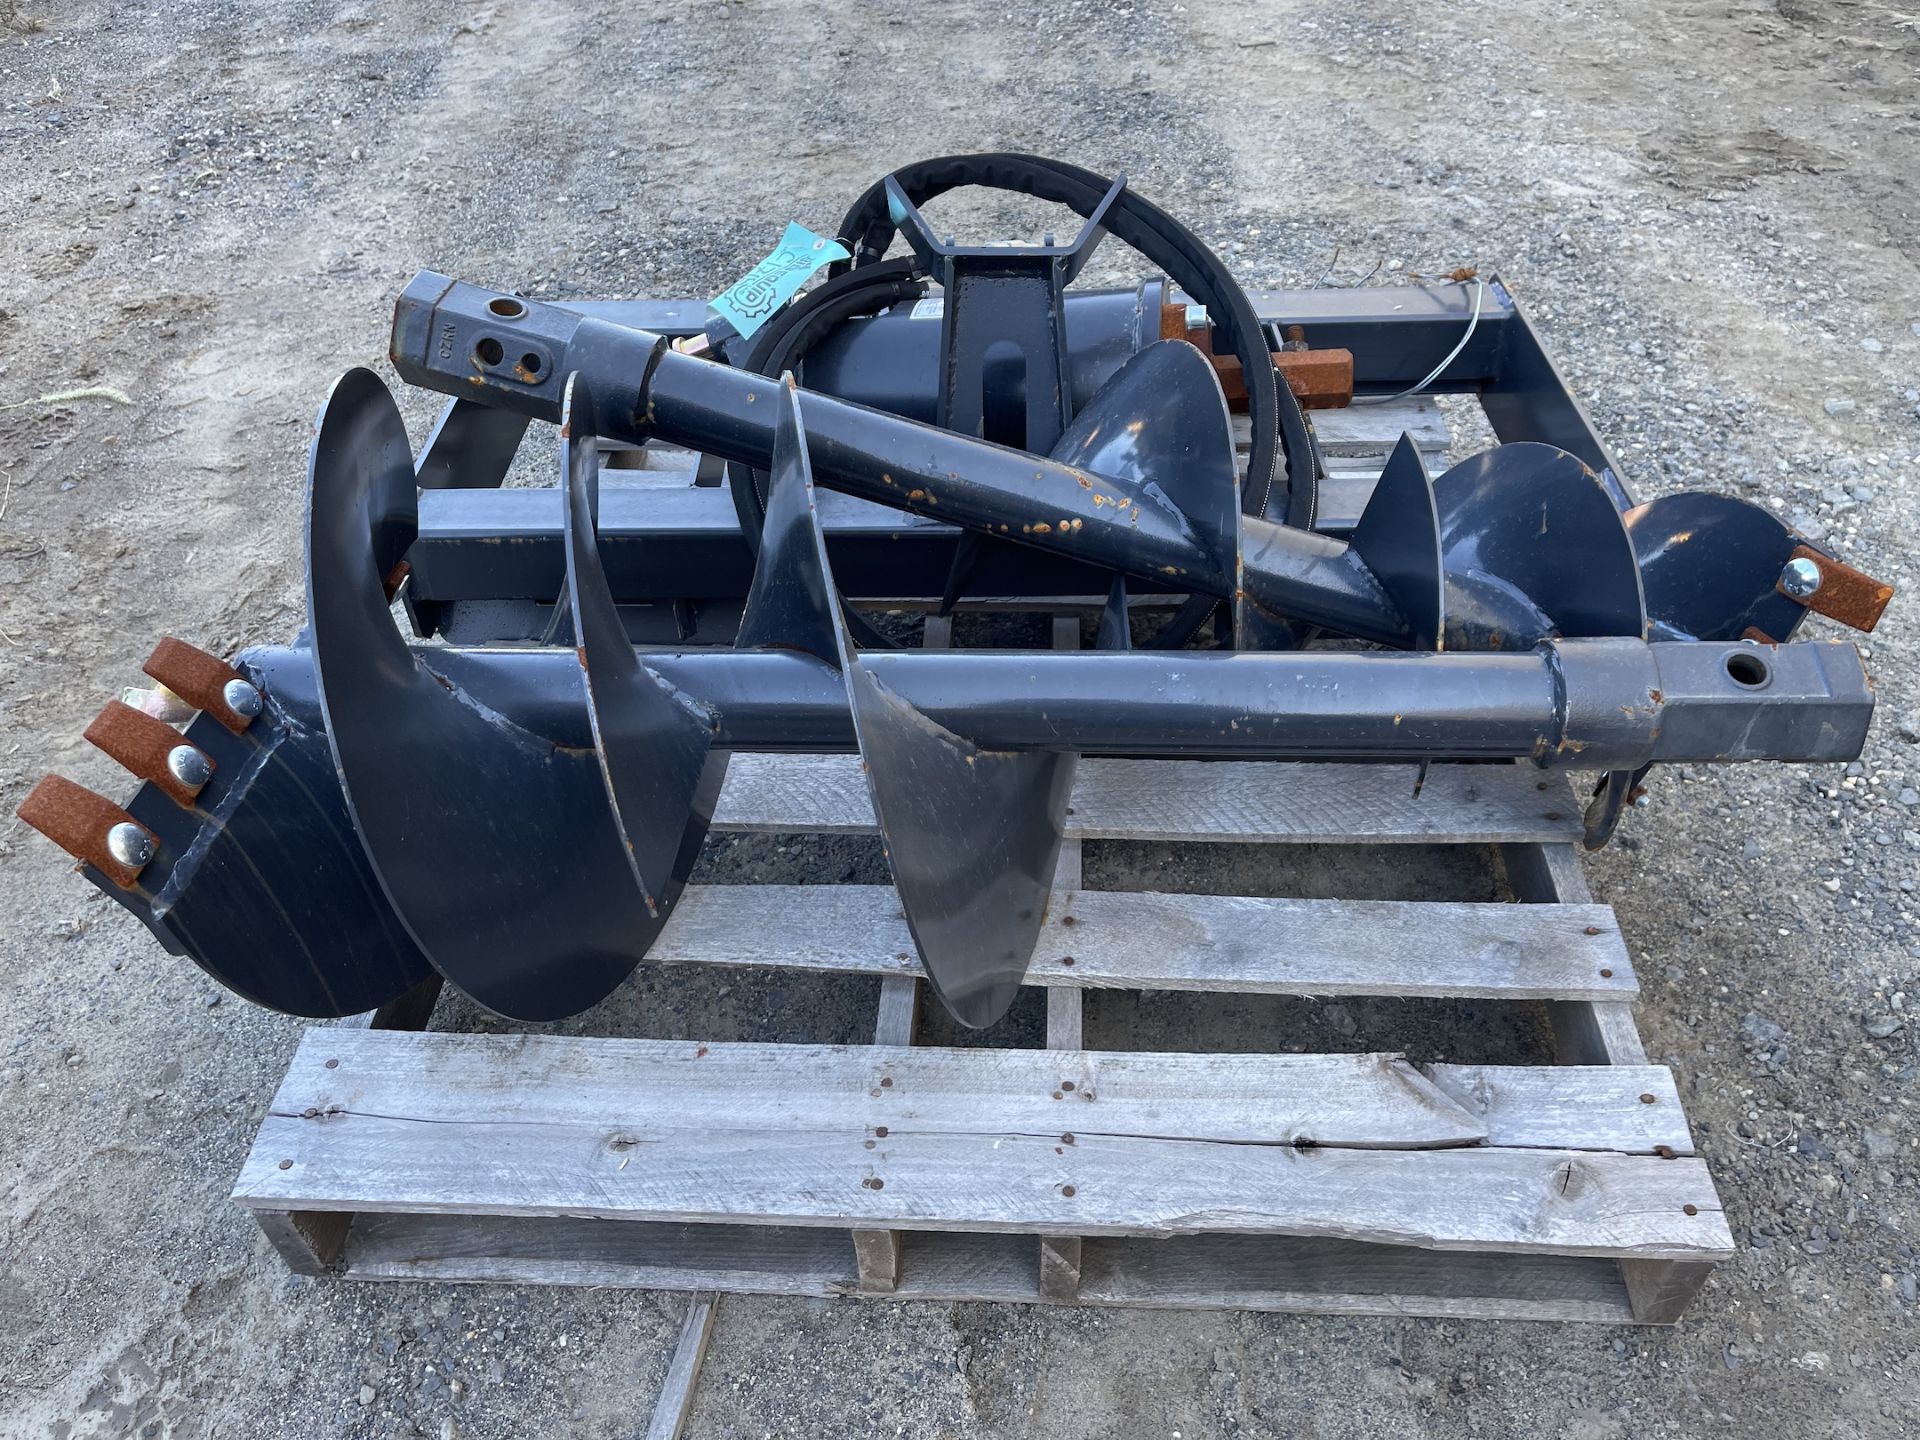 New Wolverine Auger Skid Steer Attachment (C171E) - Image 6 of 11